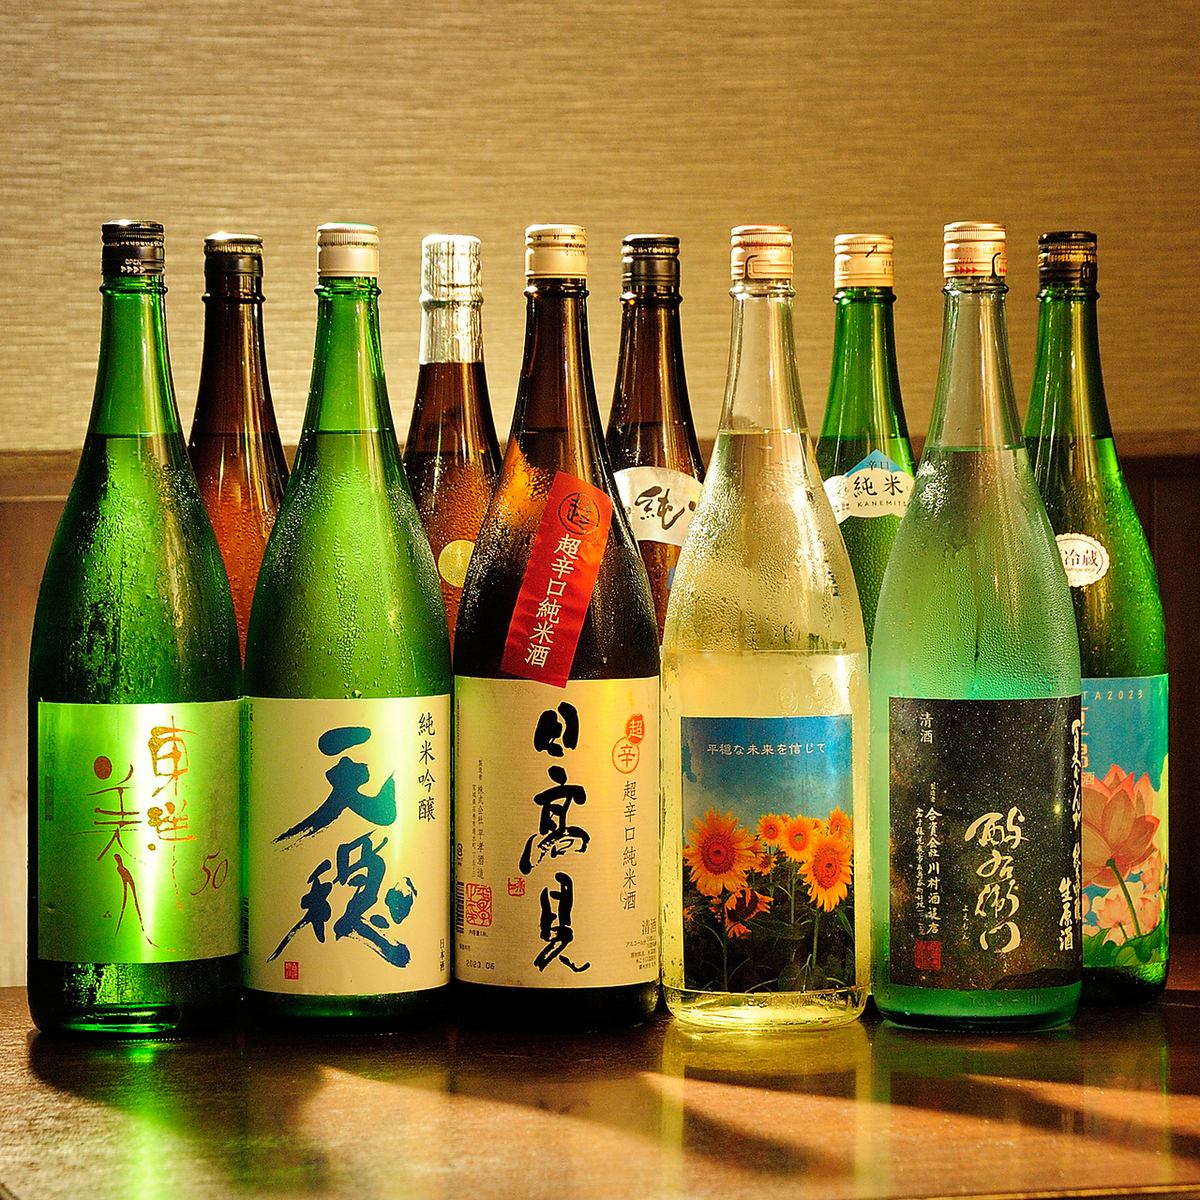 We have a variety of local sake that match the seasonal ingredients.